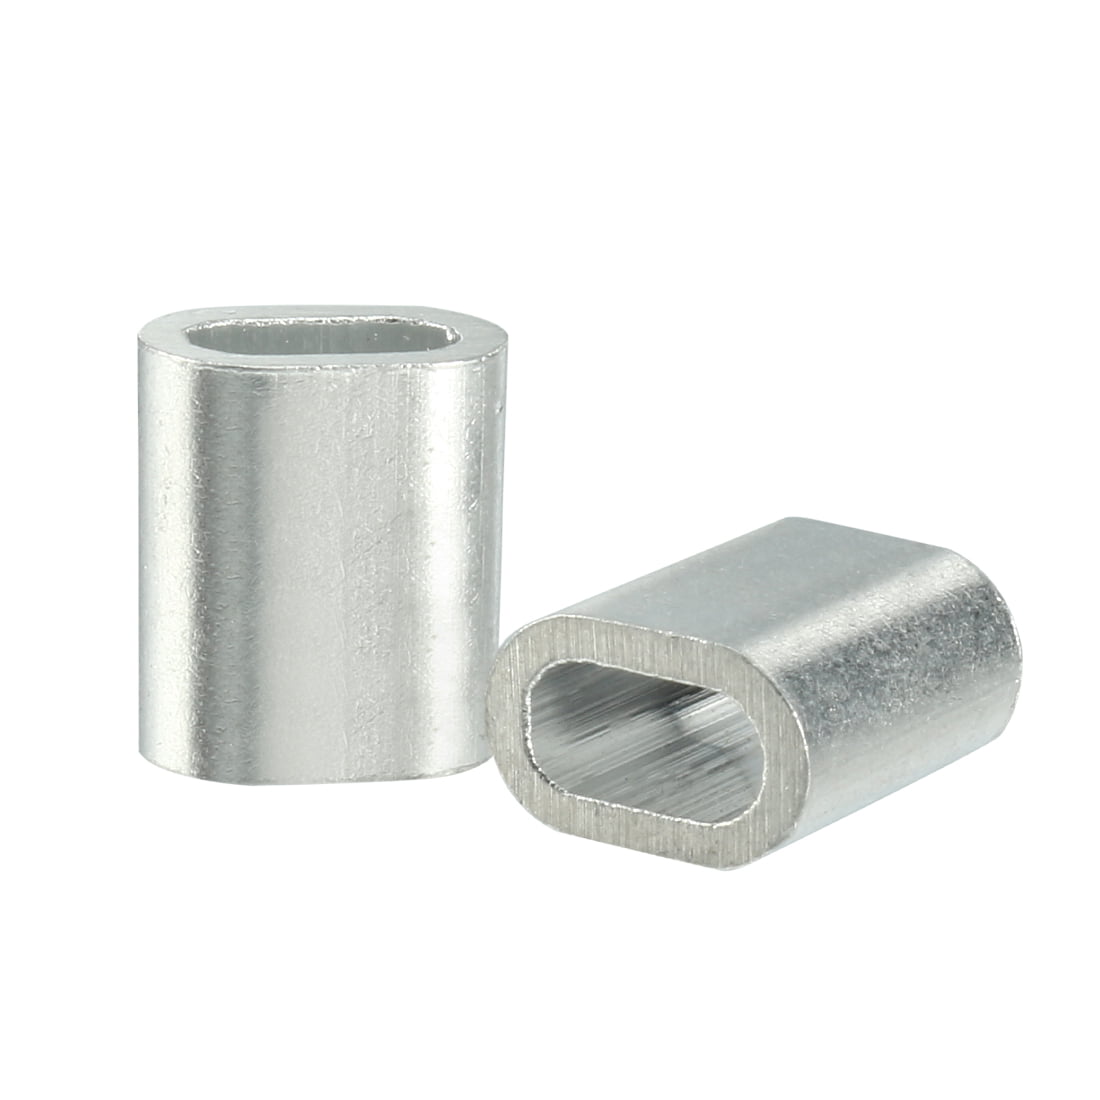 Round Hole Type TUOREN 25pcs 1/4 Inch Aluminum Crimping Stop Sleeve for Wire Rope and Cable